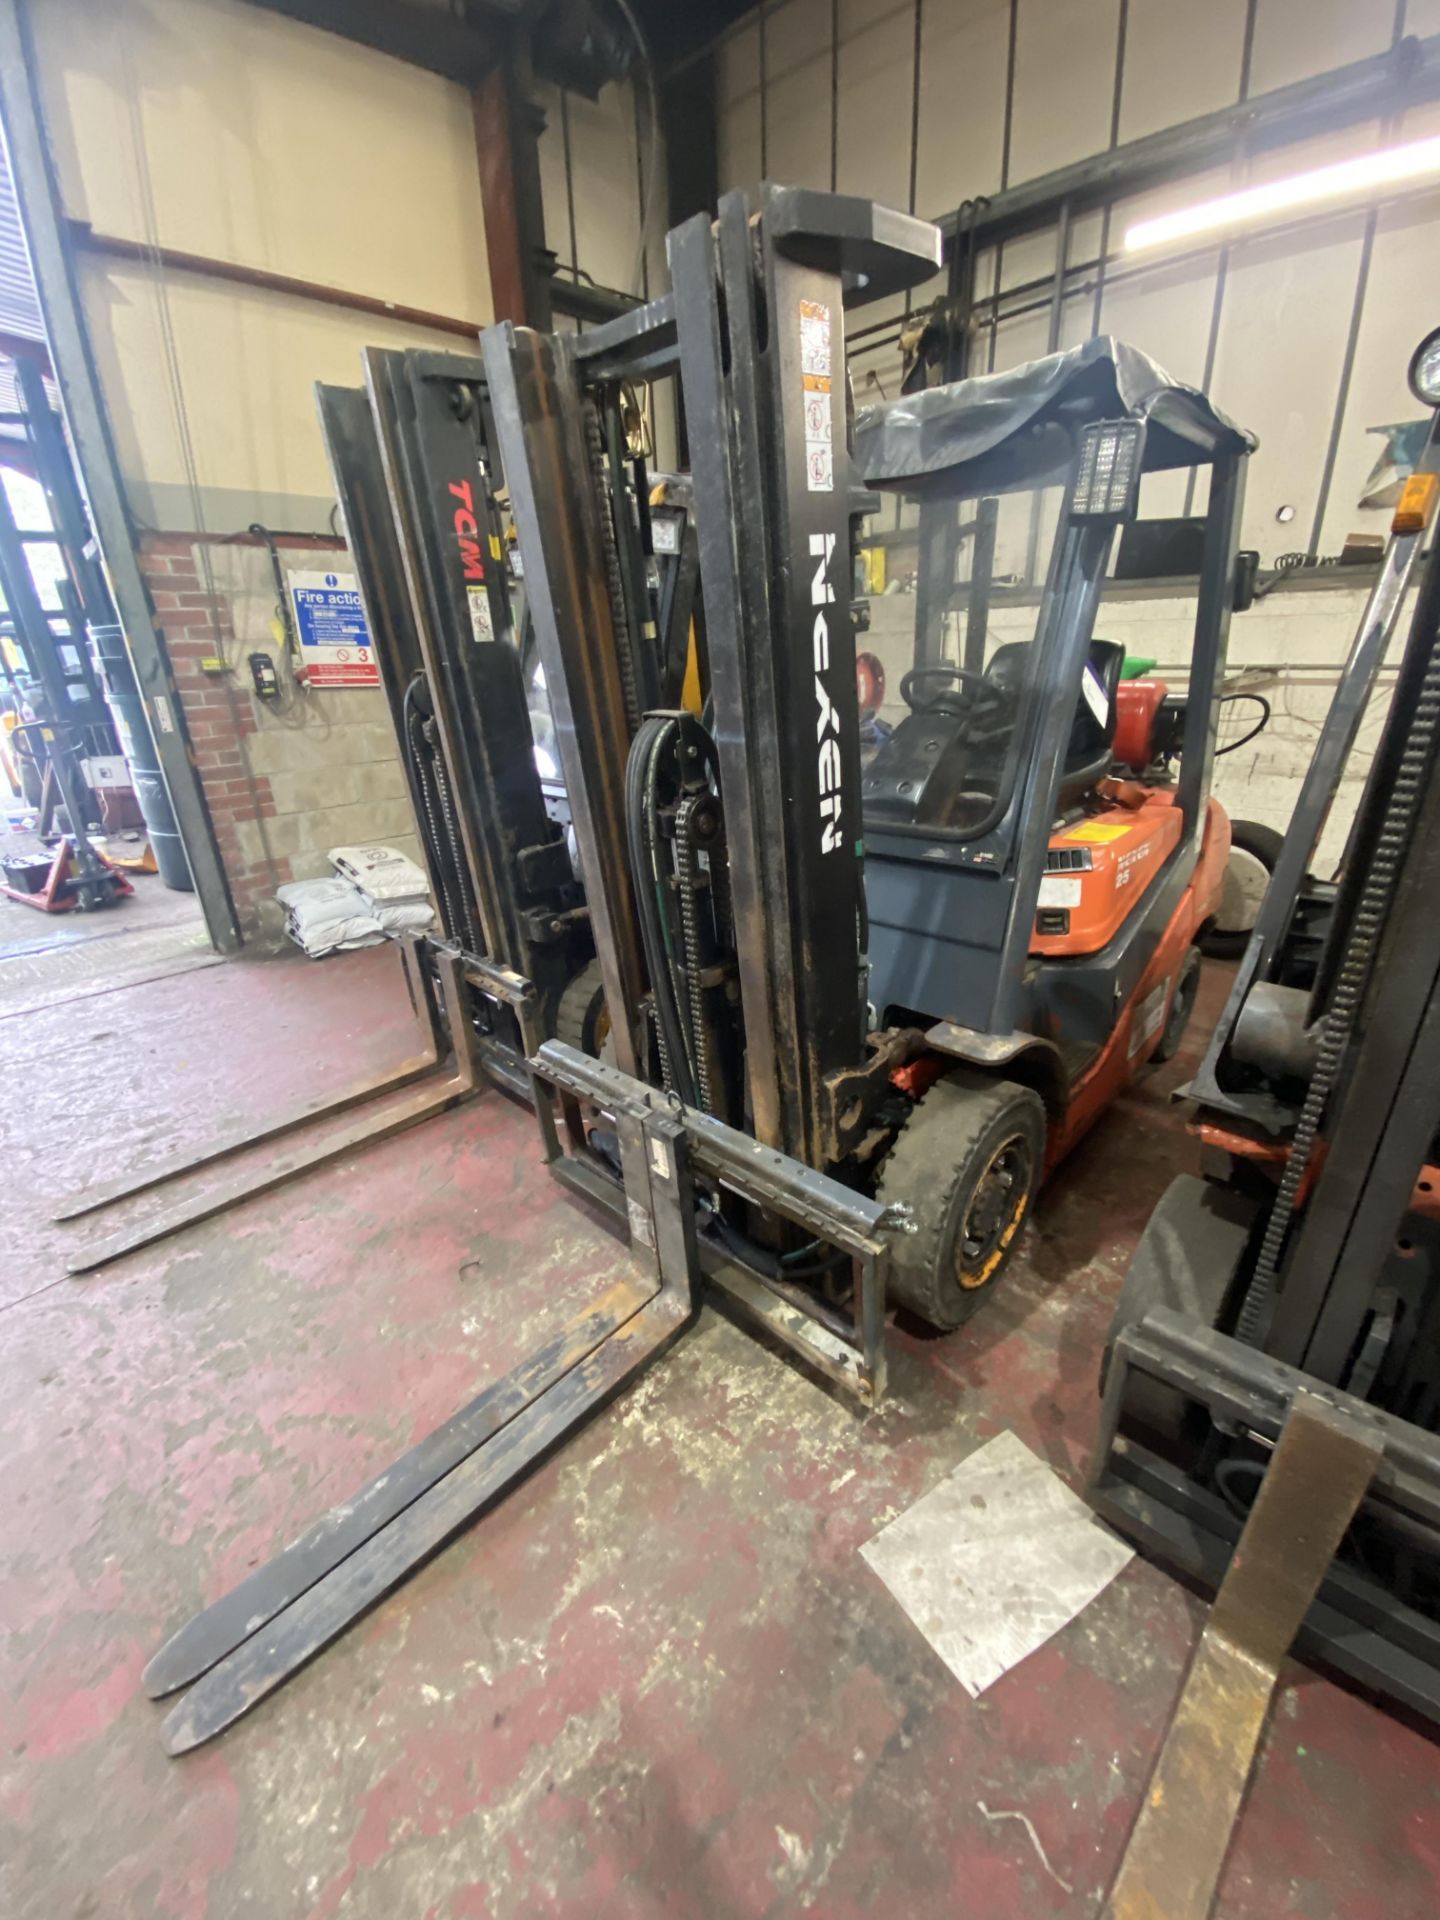 Nexen FGX25 2300kg cap. LPG Fork Lift Truck, serial no. X2E1826F, indicated hours unknown, with